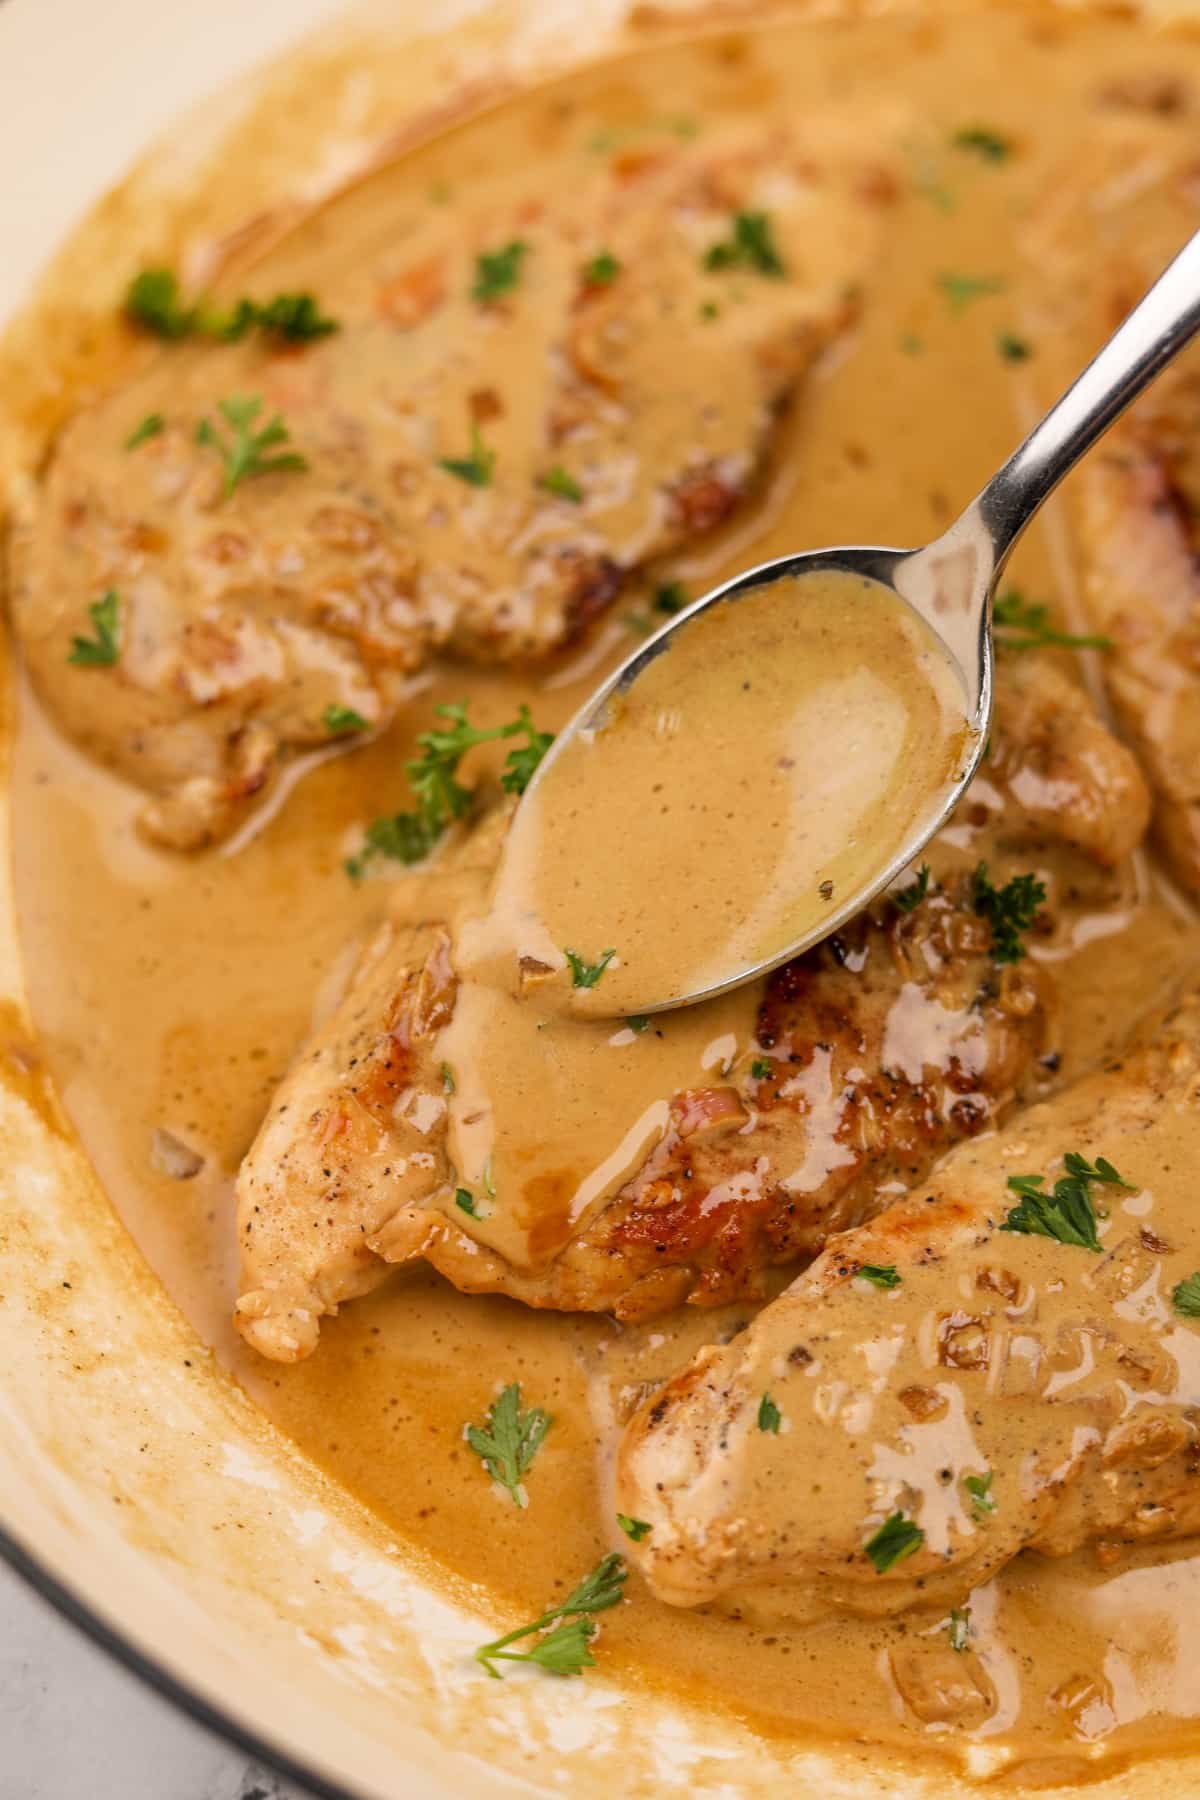 Spooning sauce on top of cooked chicken breasts.